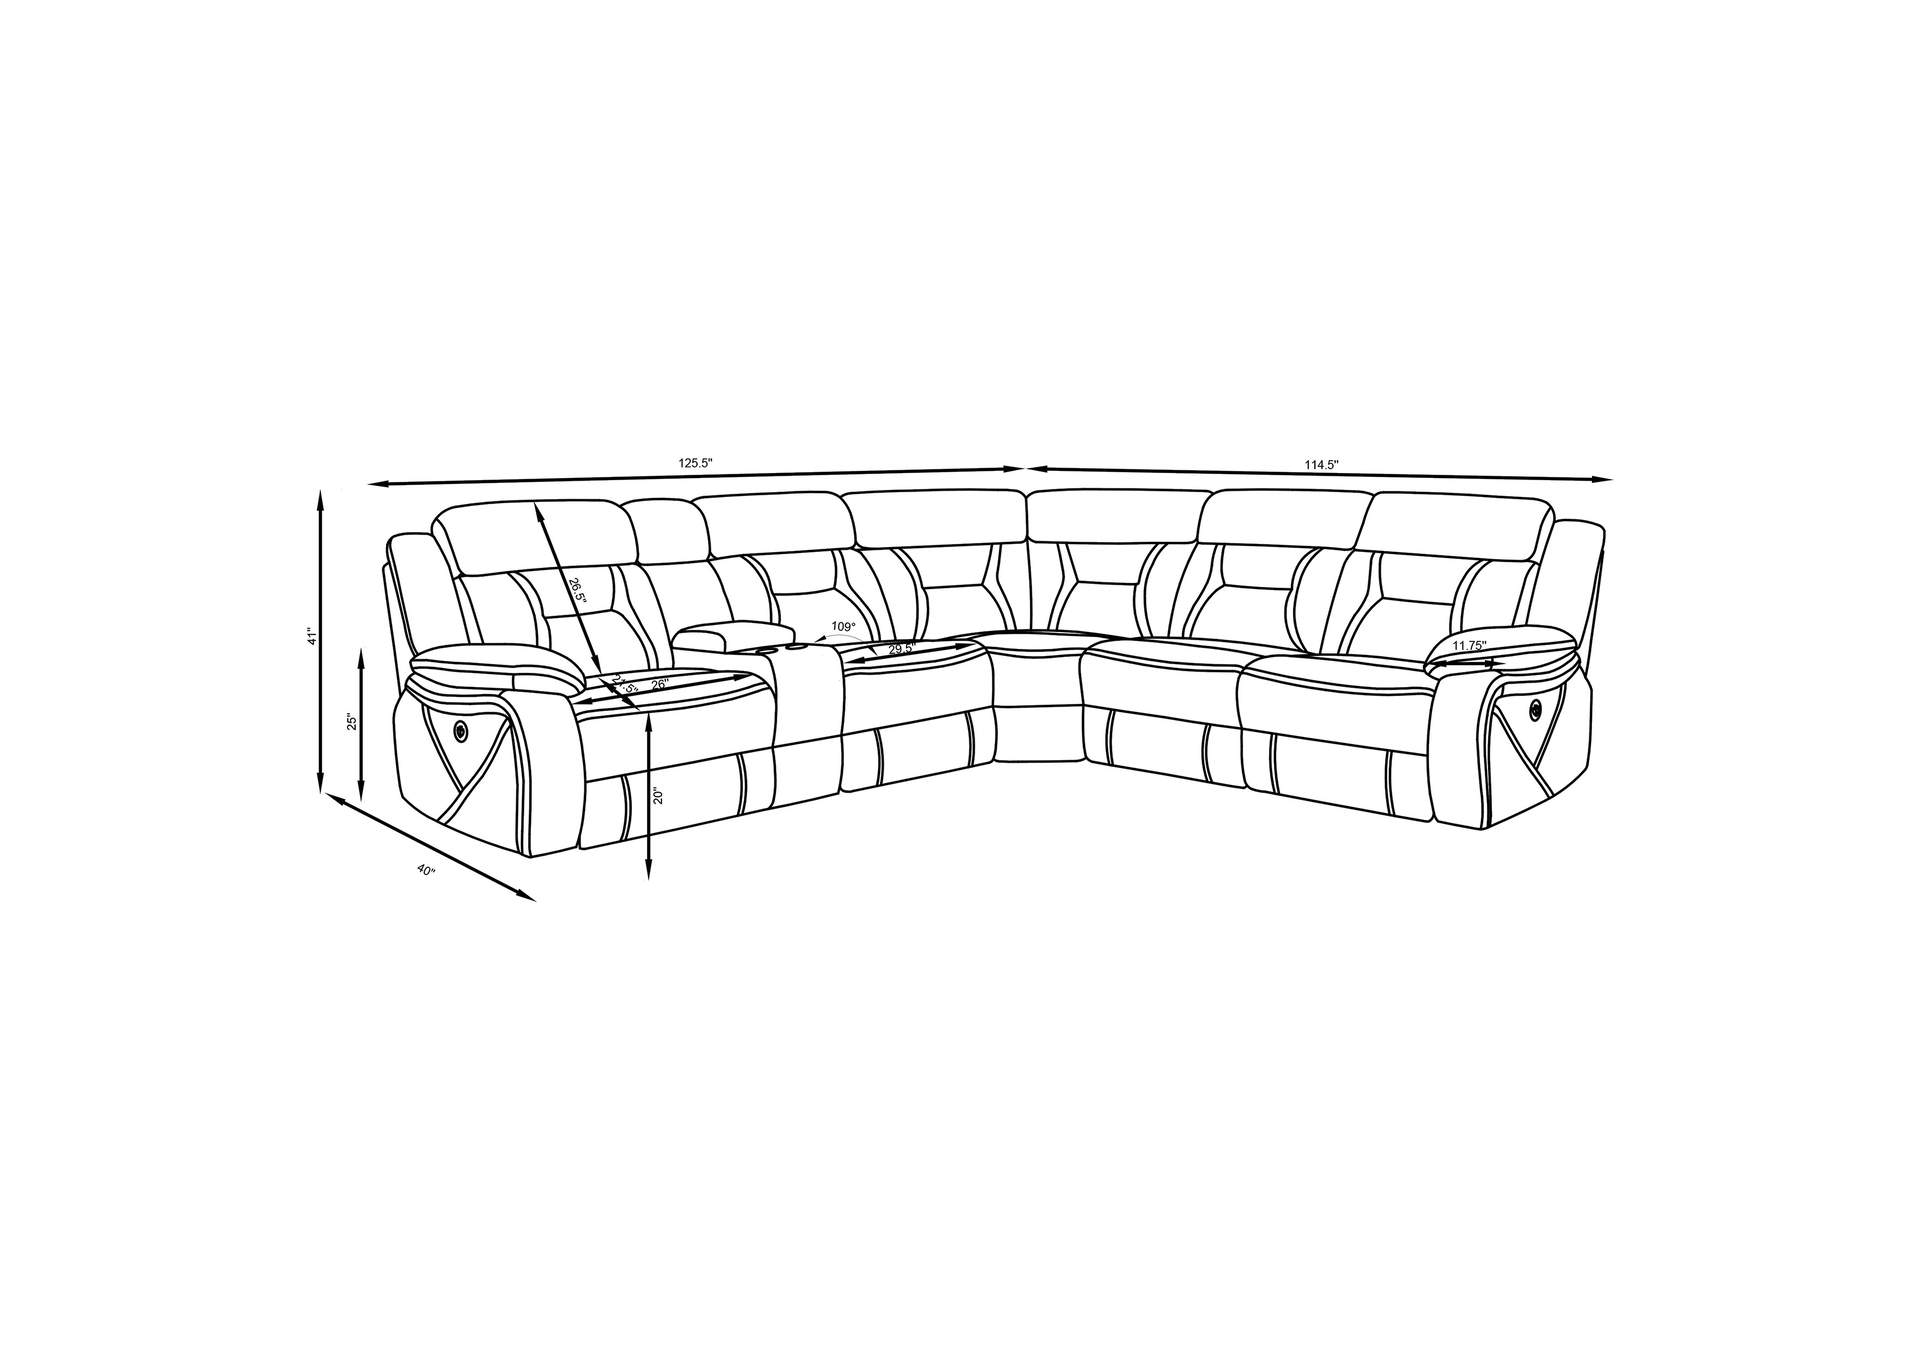 Higgins Four-Piece Upholstered Power Sectional Grey,Coaster Furniture